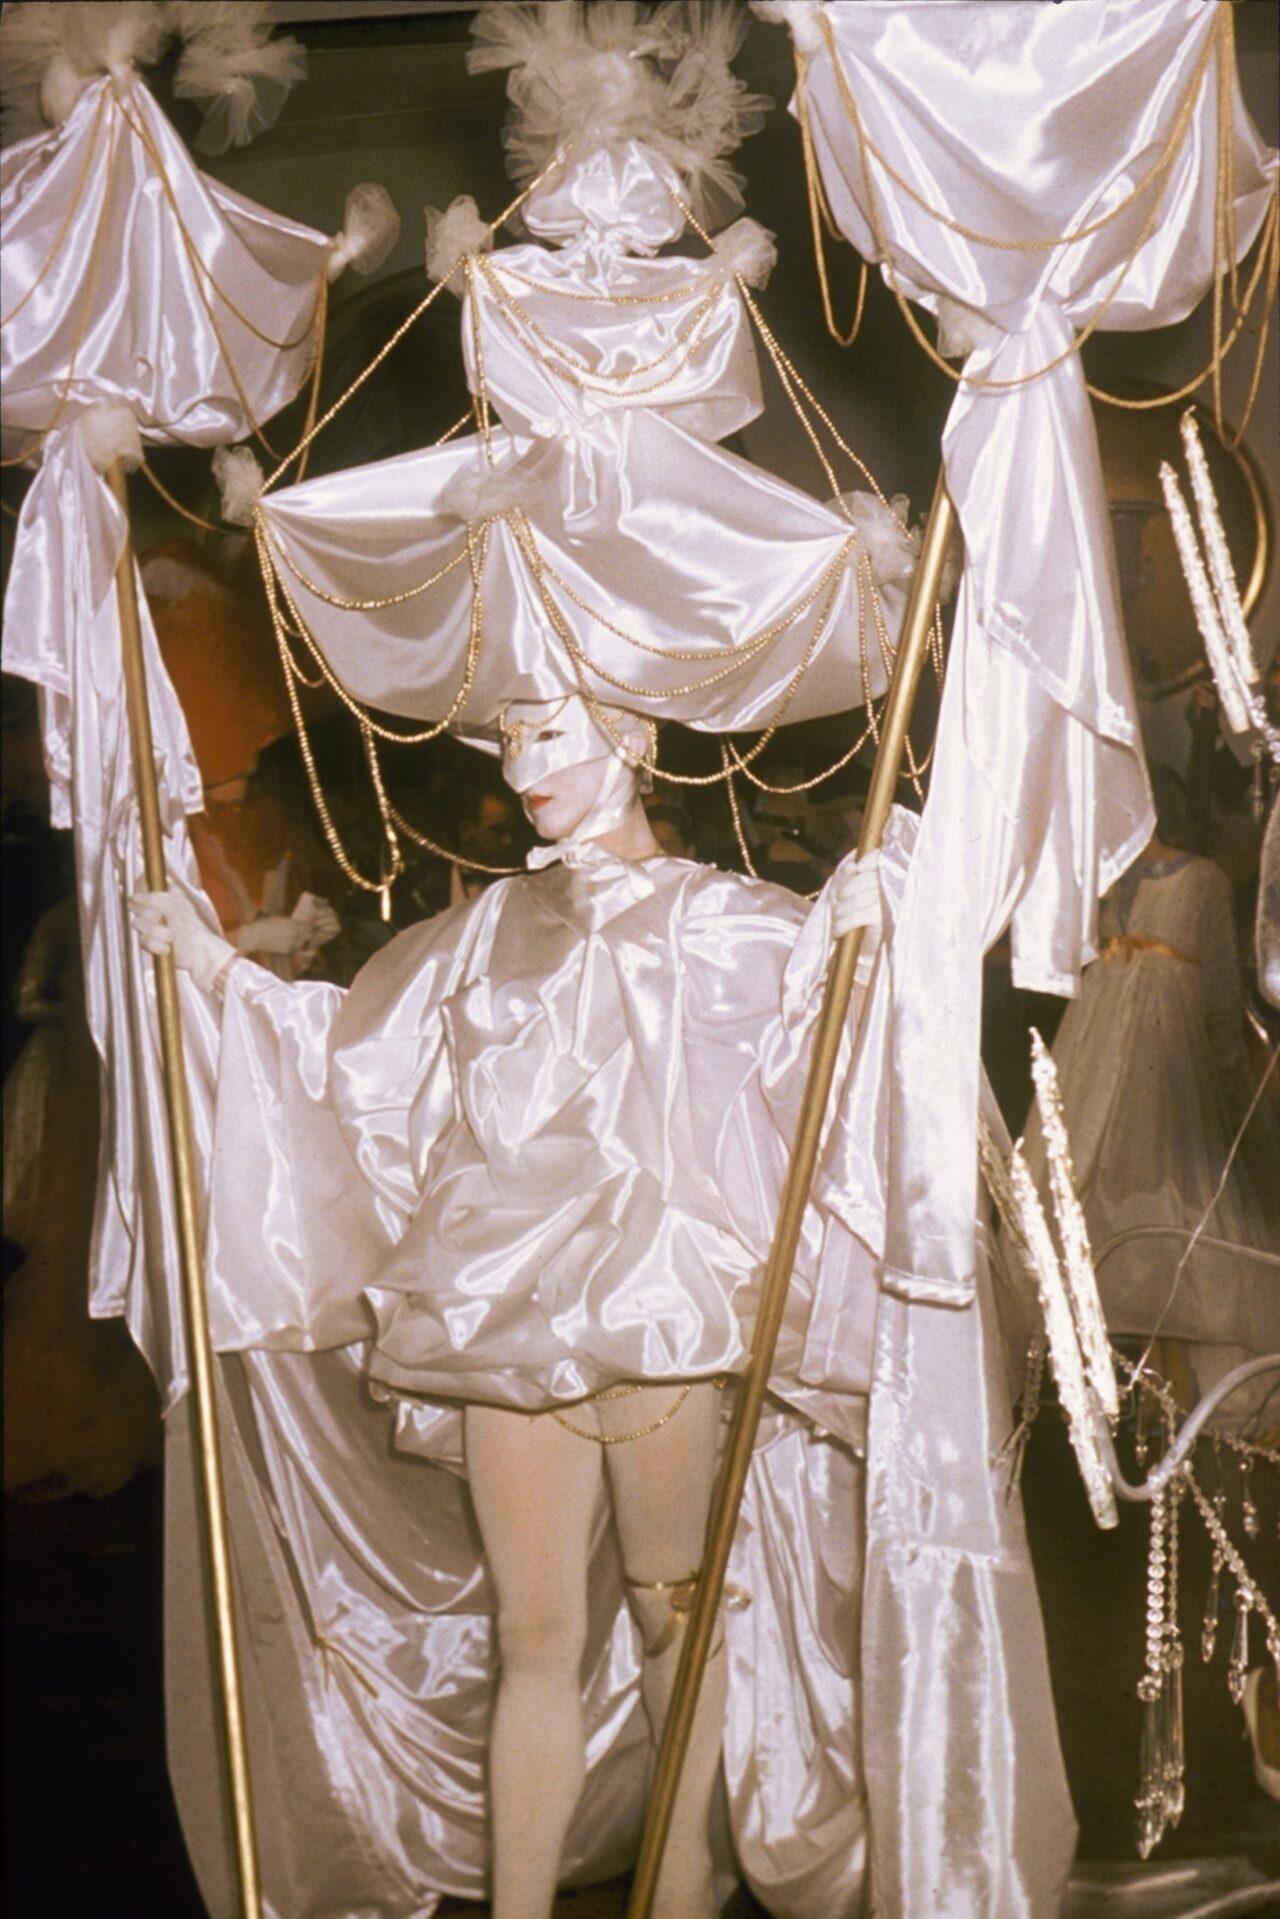 Beaux Arts Ball at the Ambassador West Hotel. Person costumed in white fabric with mask and an elaborate headdress. They are holding two staffs with more swags of white fabric.